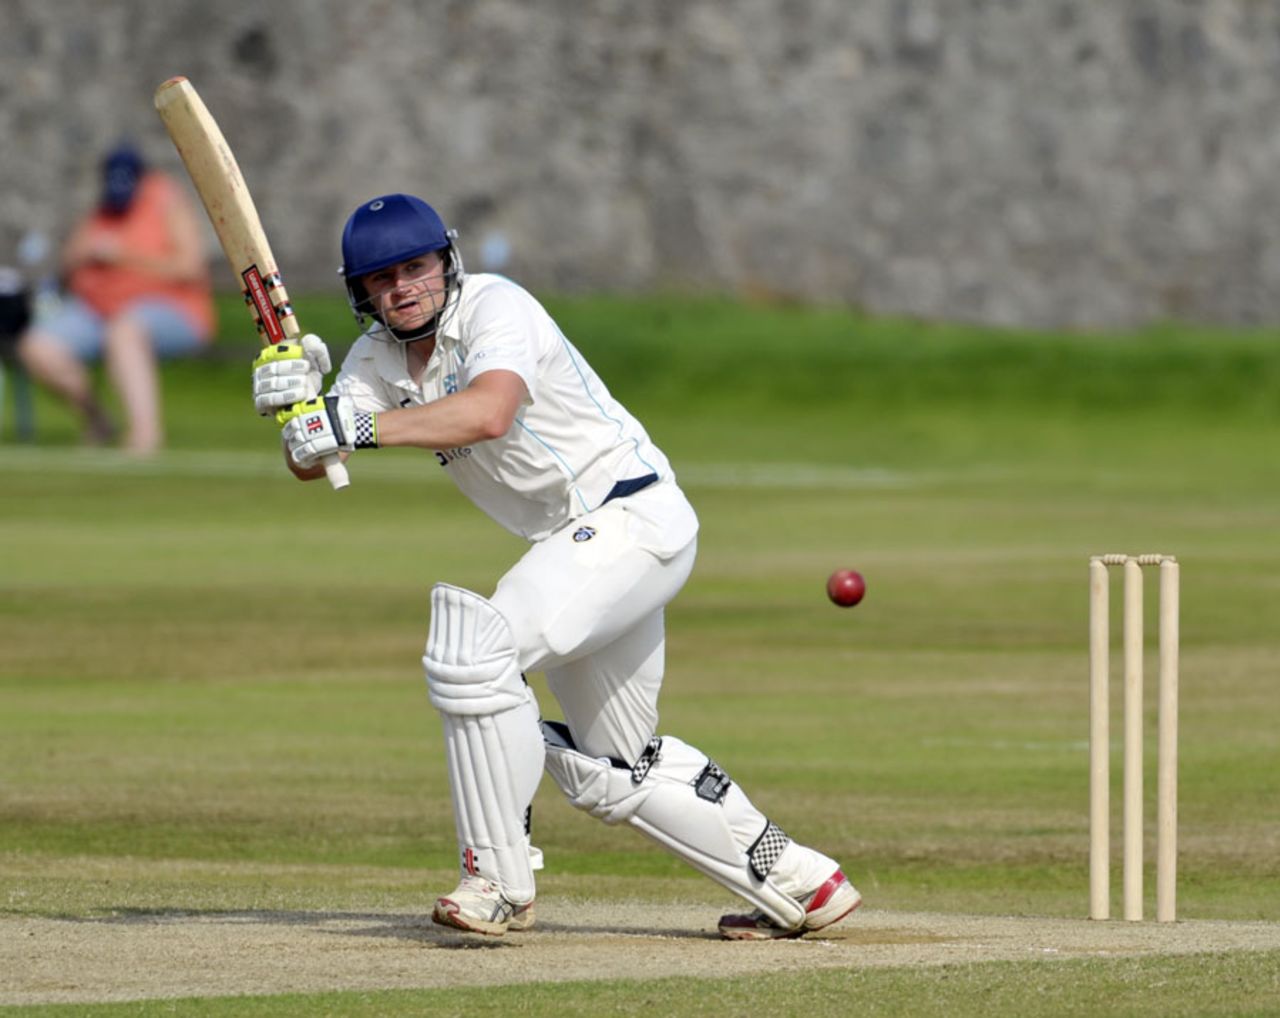 Ewan Chalmers clips the ball into the leg side, Scotland v Kenya, ICC Intercontinental Cup, 2nd day, Aberdeen, July 8, 2013